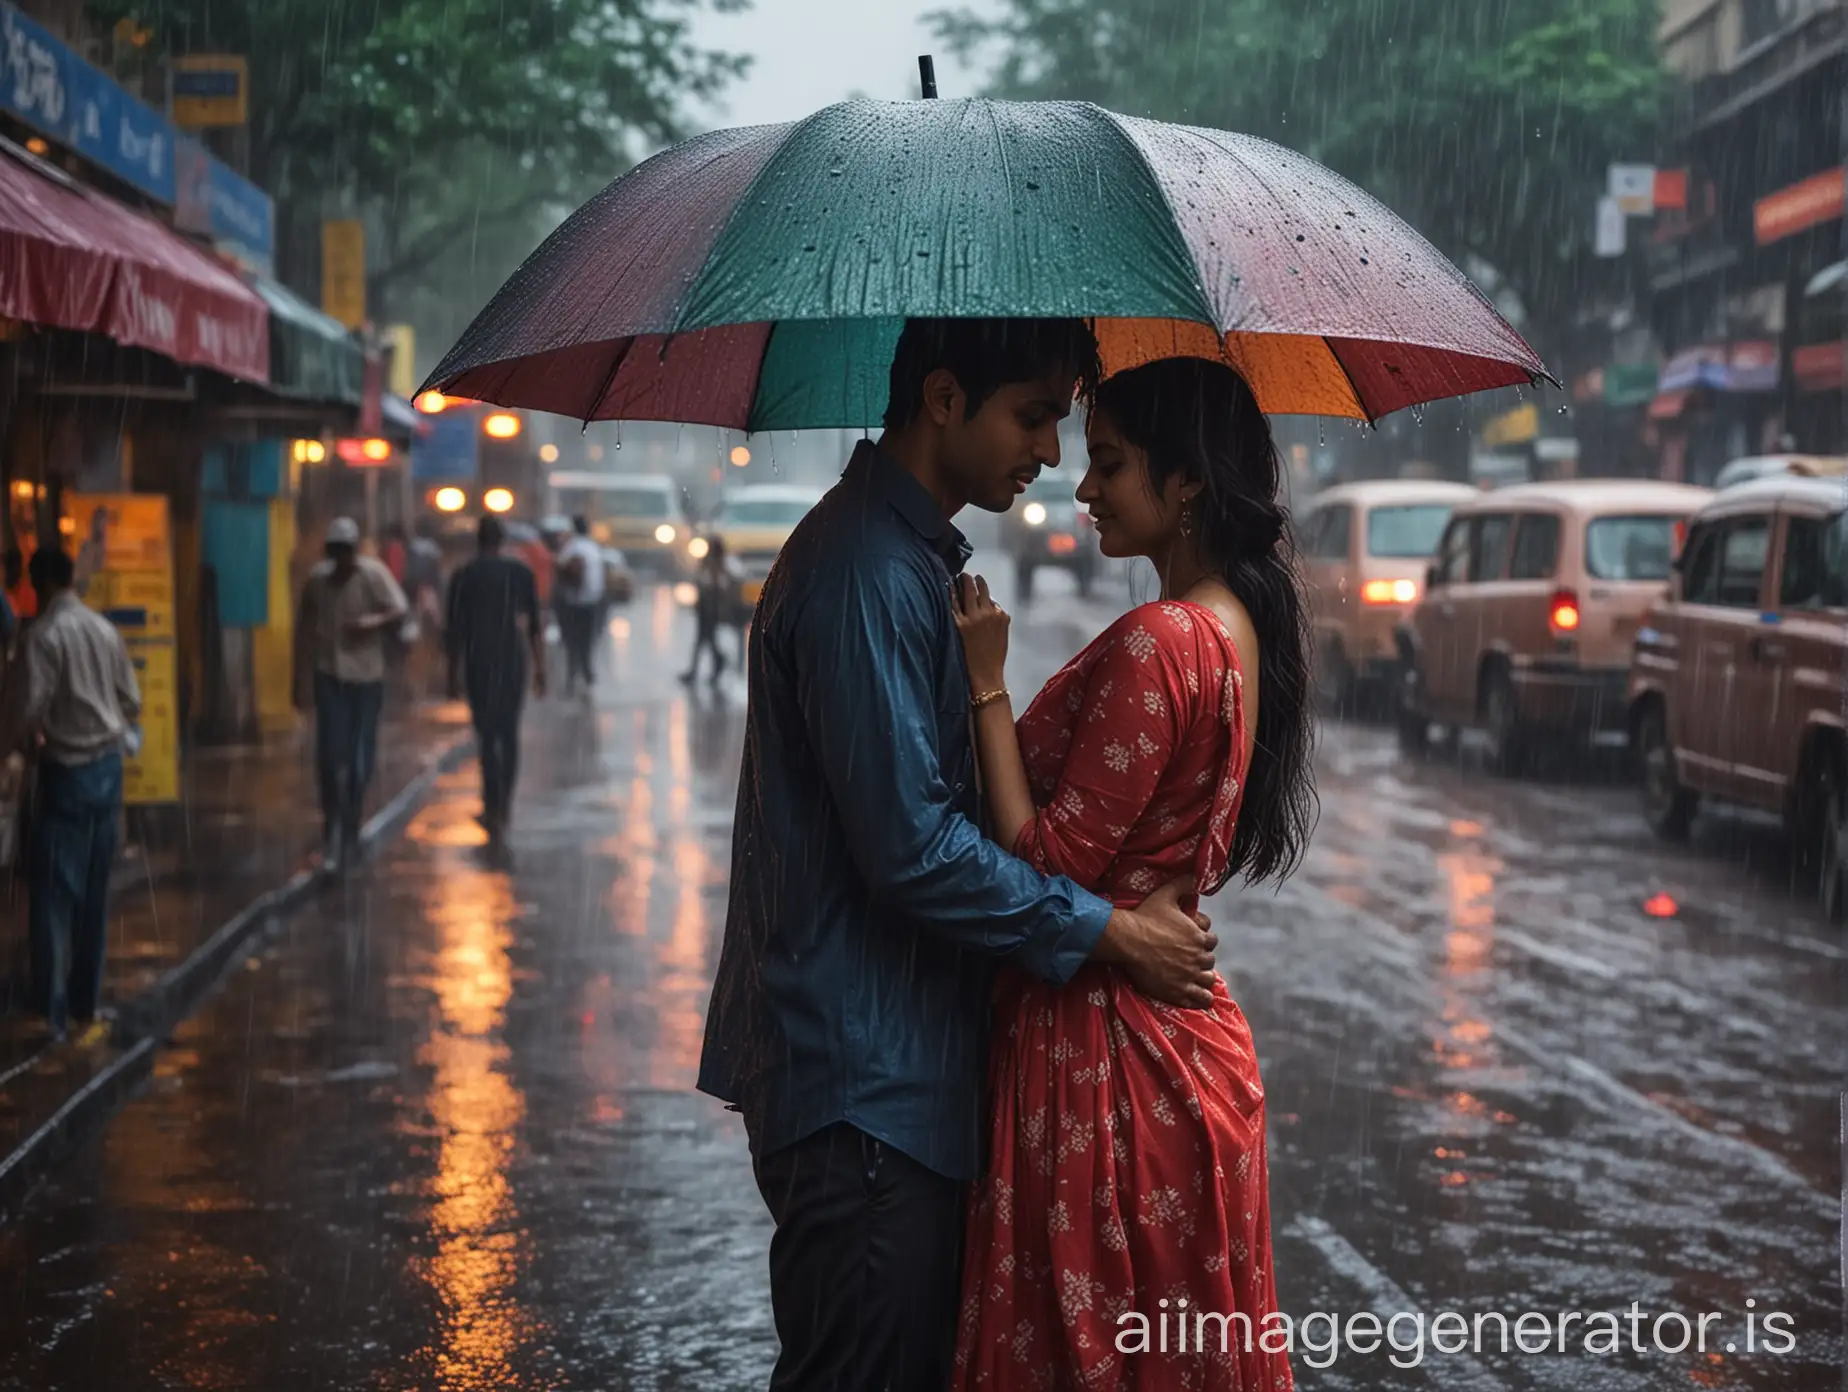 **Prompt:**

Create a photo depicting a young Indian couple hugging each other under an umbrella during a heavy rain at a busy four-road crossing signal in Mumbai, India. The scene should capture the essence of a bustling Mumbai street with traffic, including cars, bikes, and auto-rickshaws. The rain should be pouring down heavily, creating a dramatic and romantic atmosphere. The couple should be the focal point, with their emotions clearly visible as they hold each other close, oblivious to the chaos around them. 

The style should be reminiscent of a Bollywood movie poster with vibrant colors and dramatic lighting. Add a title at the top of the image that reads "Love in Rain" in a stylish Bollywood font, giving it a cinematic feel. 

Ensure the background includes iconic elements of Mumbai, such as old buildings, street vendors, and neon signs, to enhance the authenticity of the setting.